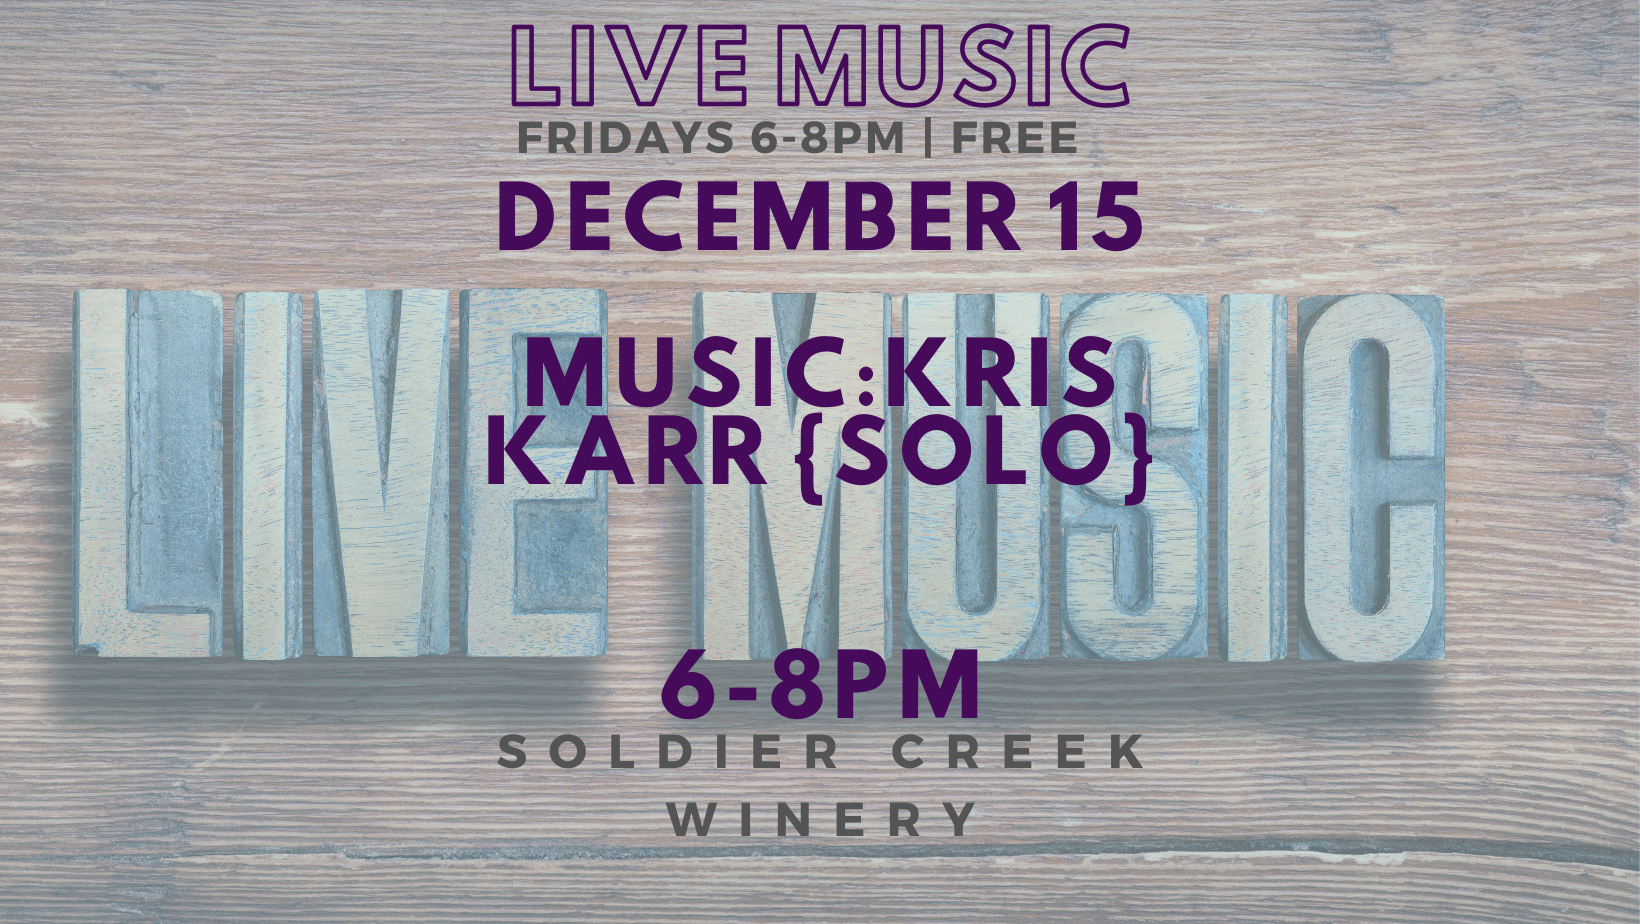 vineyard vibrations at soldier creek winery on friday, dec 15 from 6-8pm featuring kris karr {solo}. free to listen!